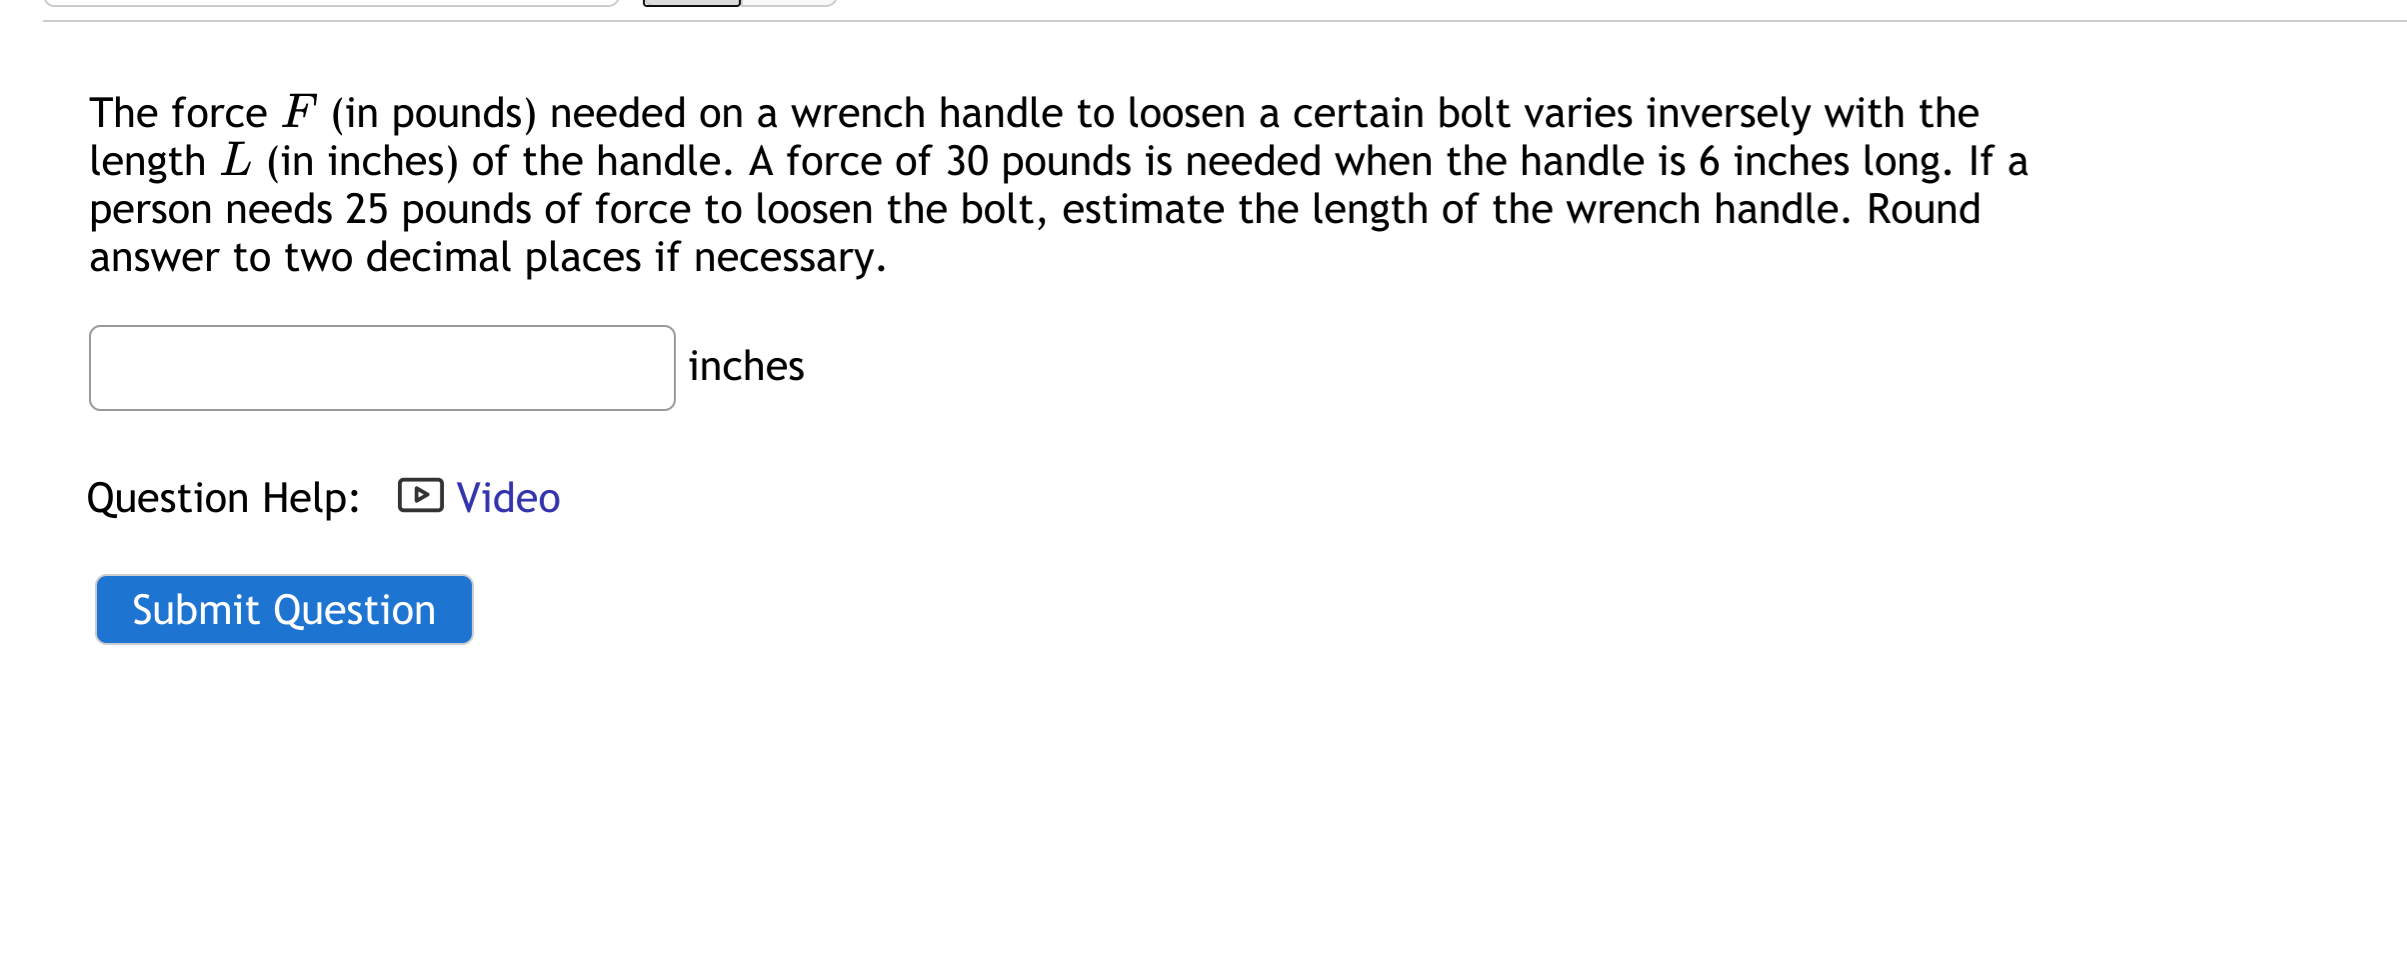 The force F (in pounds) needed on a wrench handle to loosen a certain bolt varies inversely with the
length L (in inches) of the handle. A force of 30 pounds is needed when the handle is 6 inches long. If a
person needs 25 pounds of force to loosen the bolt, estimate the length of the wrench handle. Round
answer to two decimal places if necessary.
inches
Question Help: D Video
Submit Question
